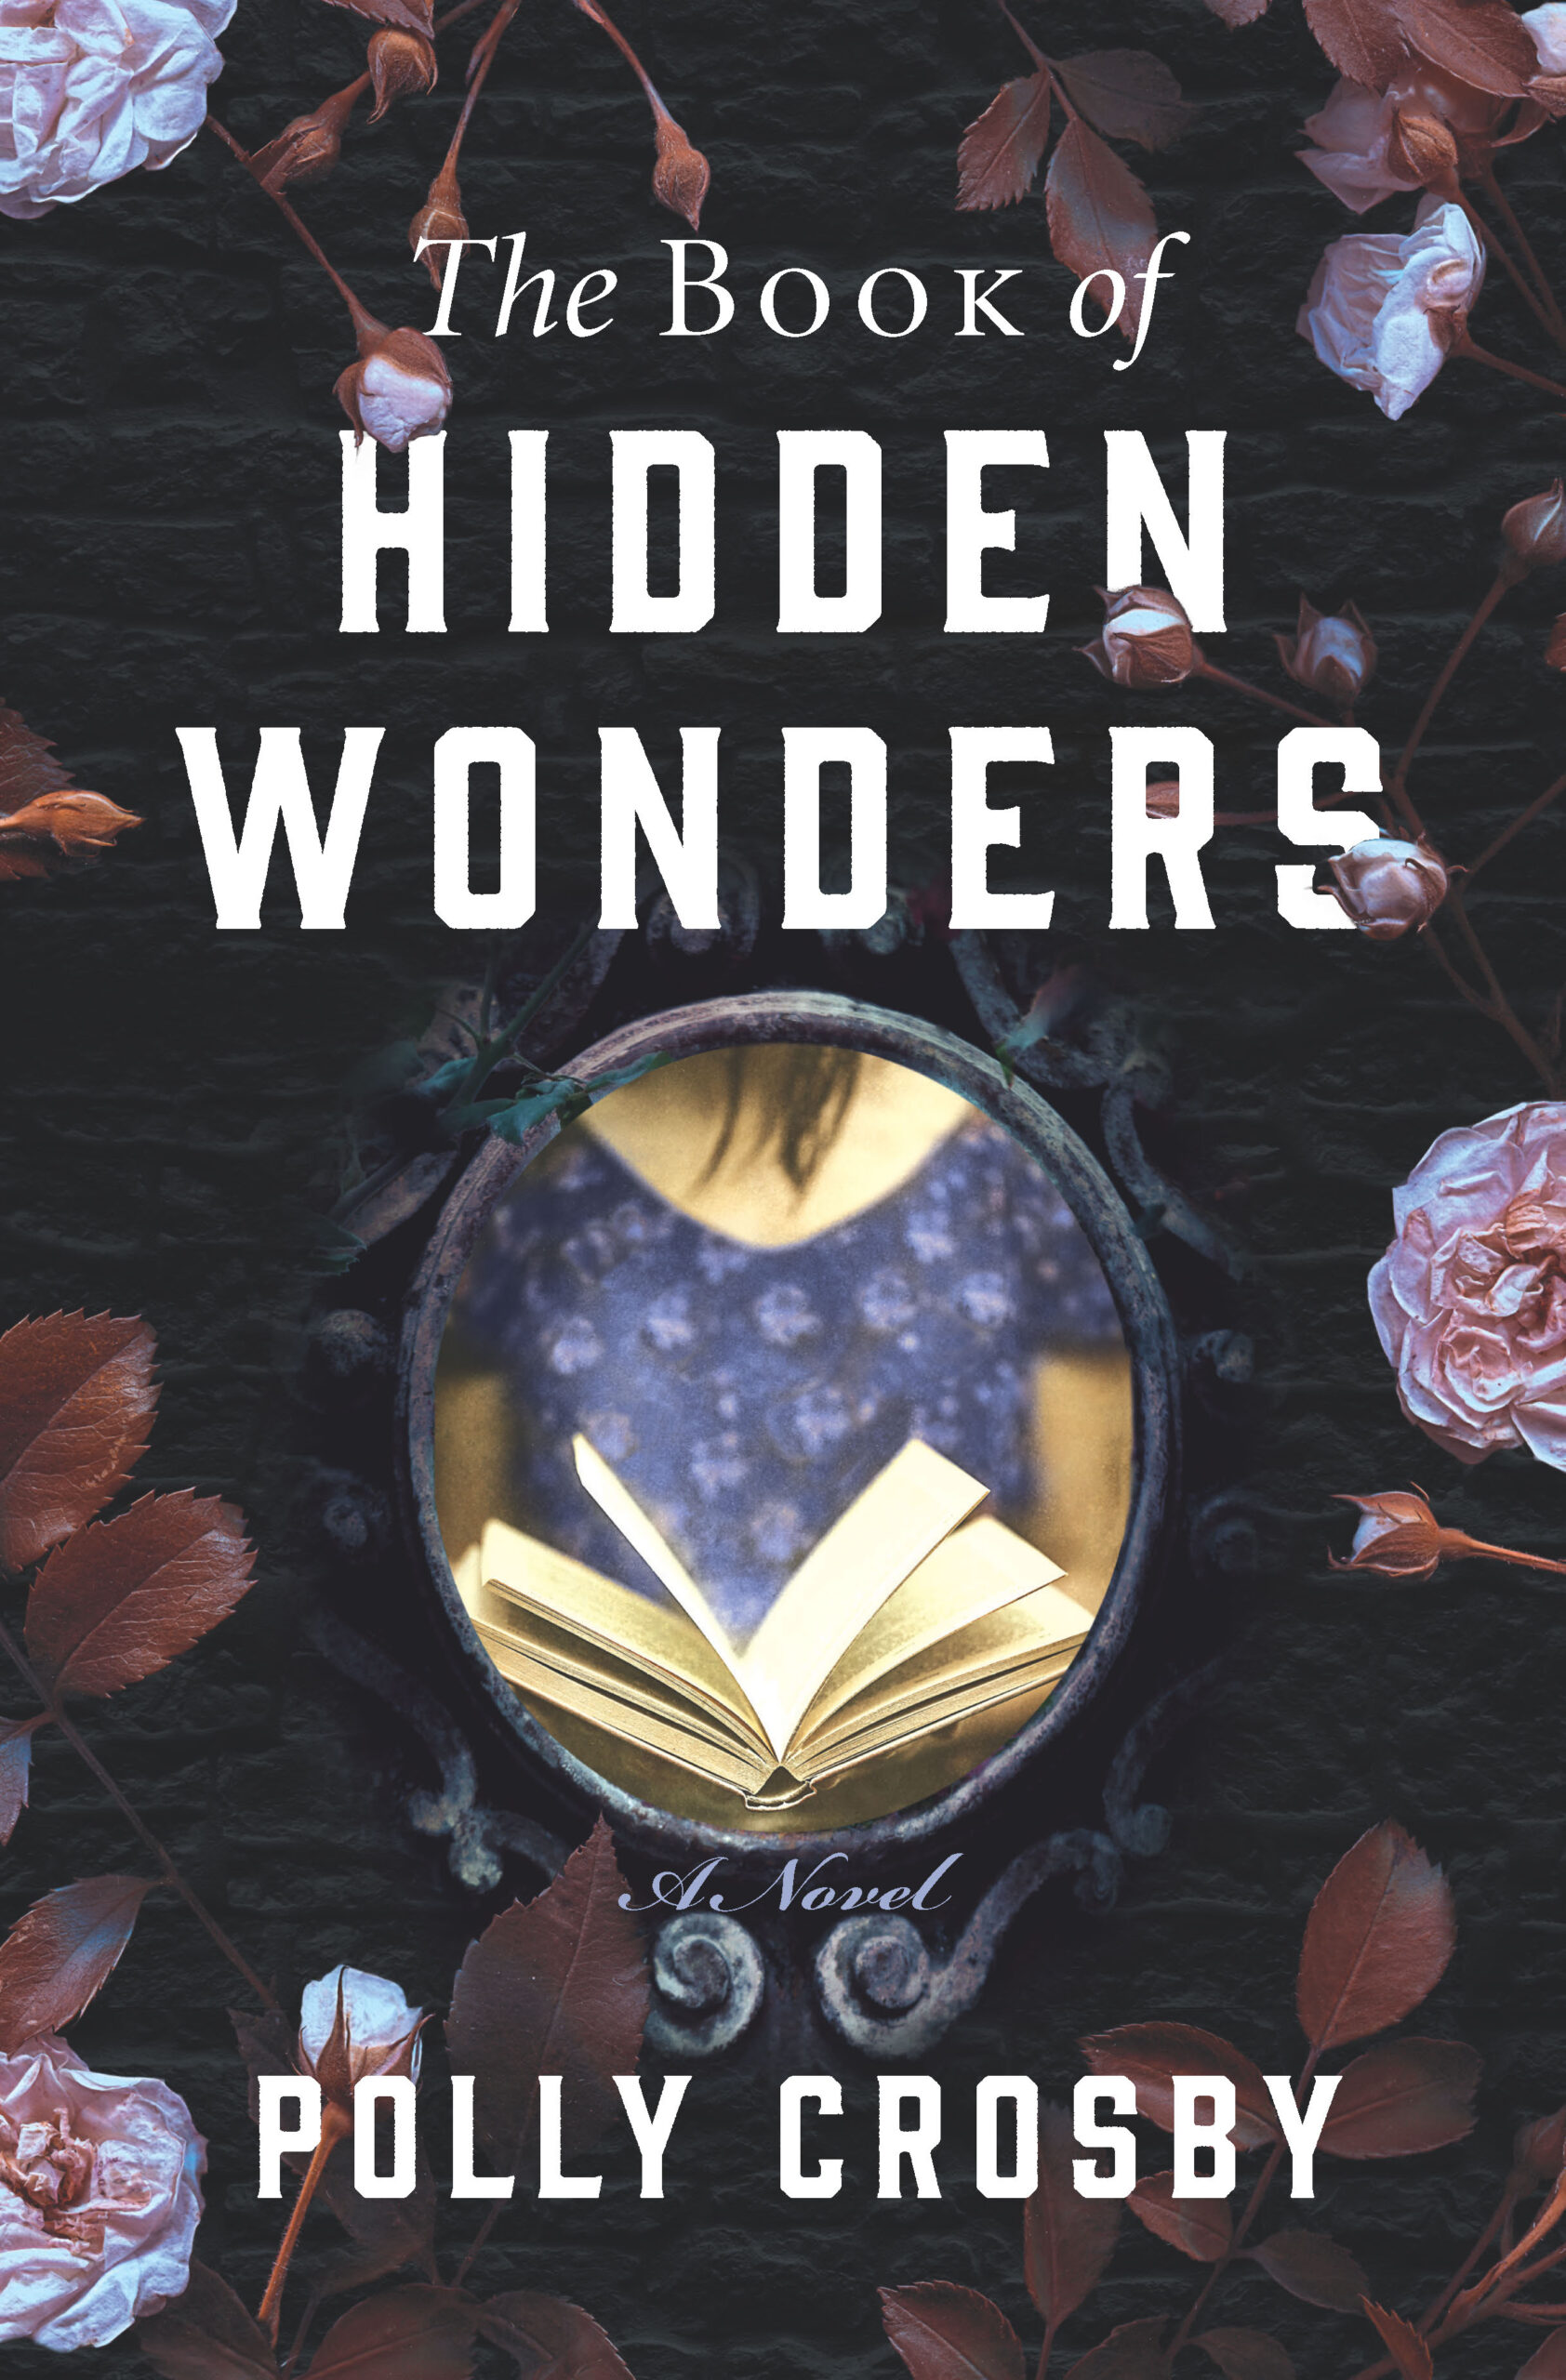 Review: The Book of Hidden Wonders by Polly Crosby